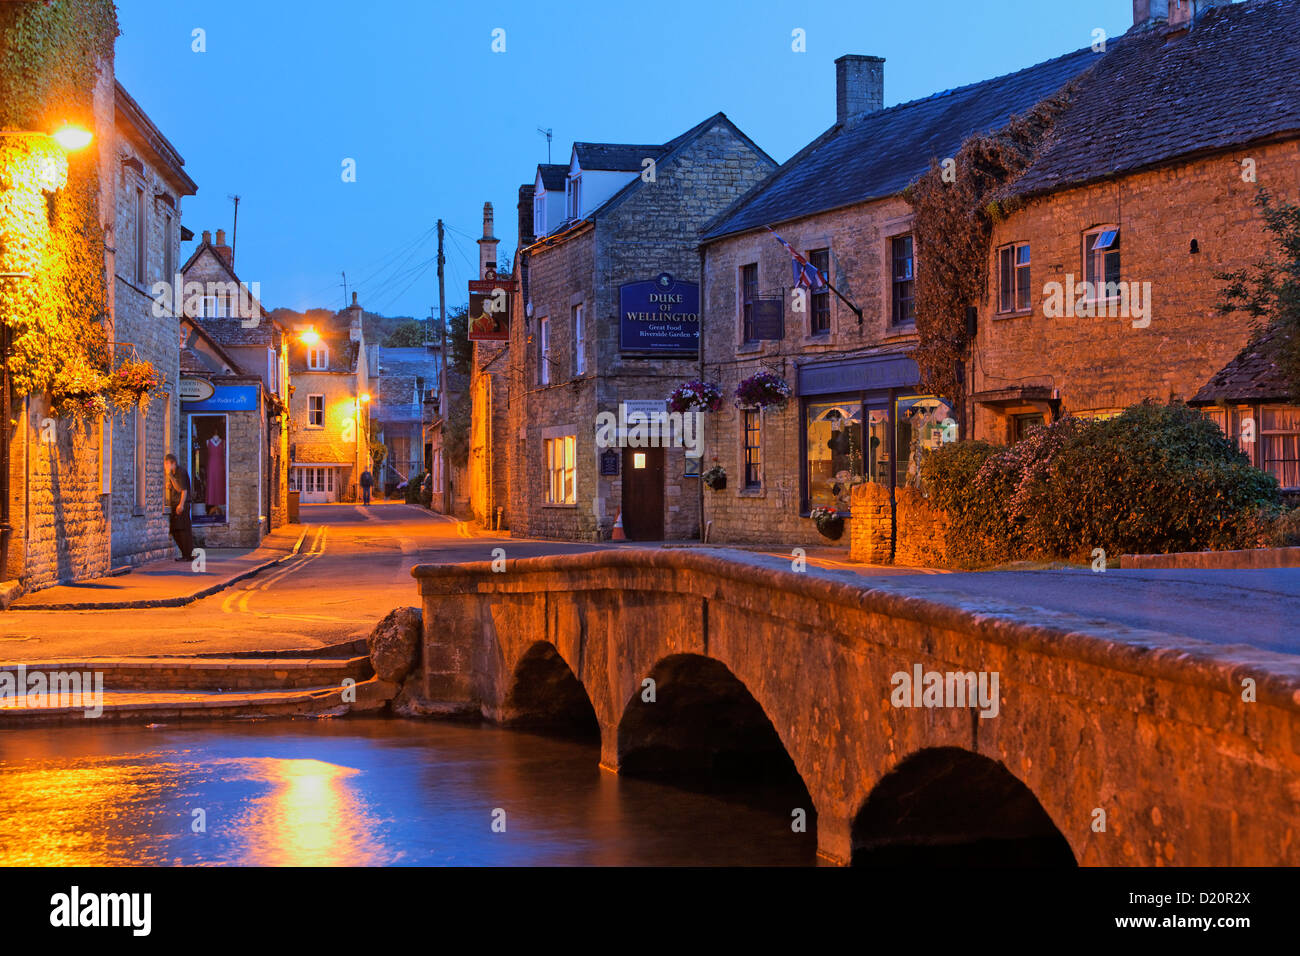 Windrush river in the evening, Bourton-on-the-water, Gloucestershire, Cotswolds, England, Great Britain, Europe Stock Photo